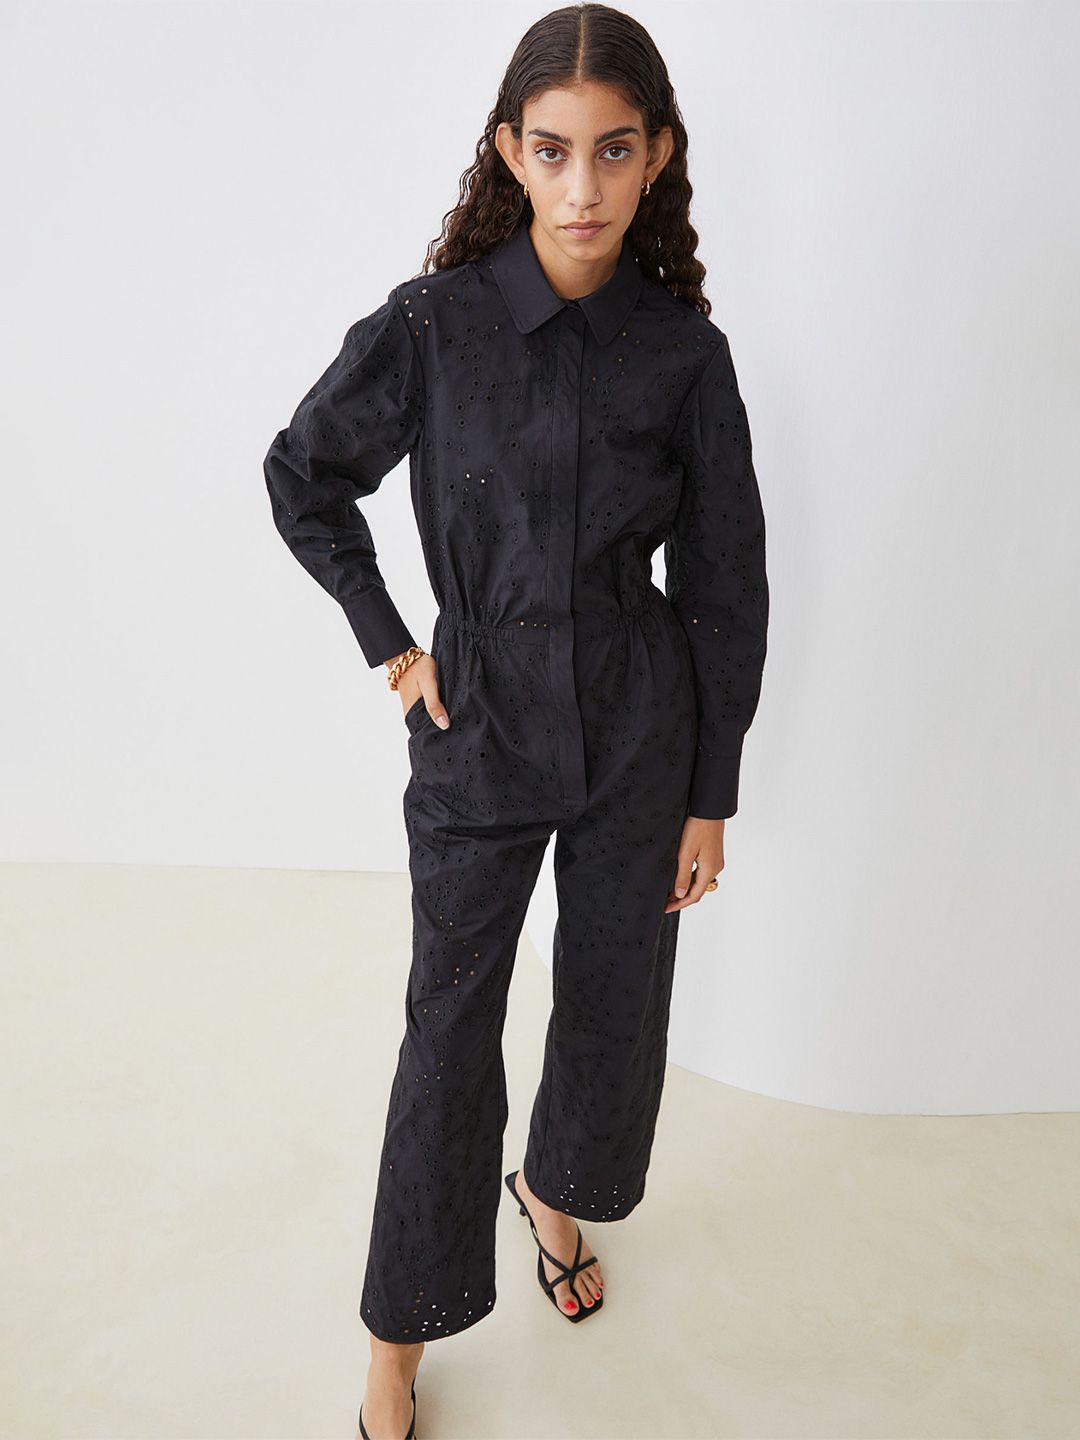 H&M Women Black Broderie Detail Jumpsuit Price in India